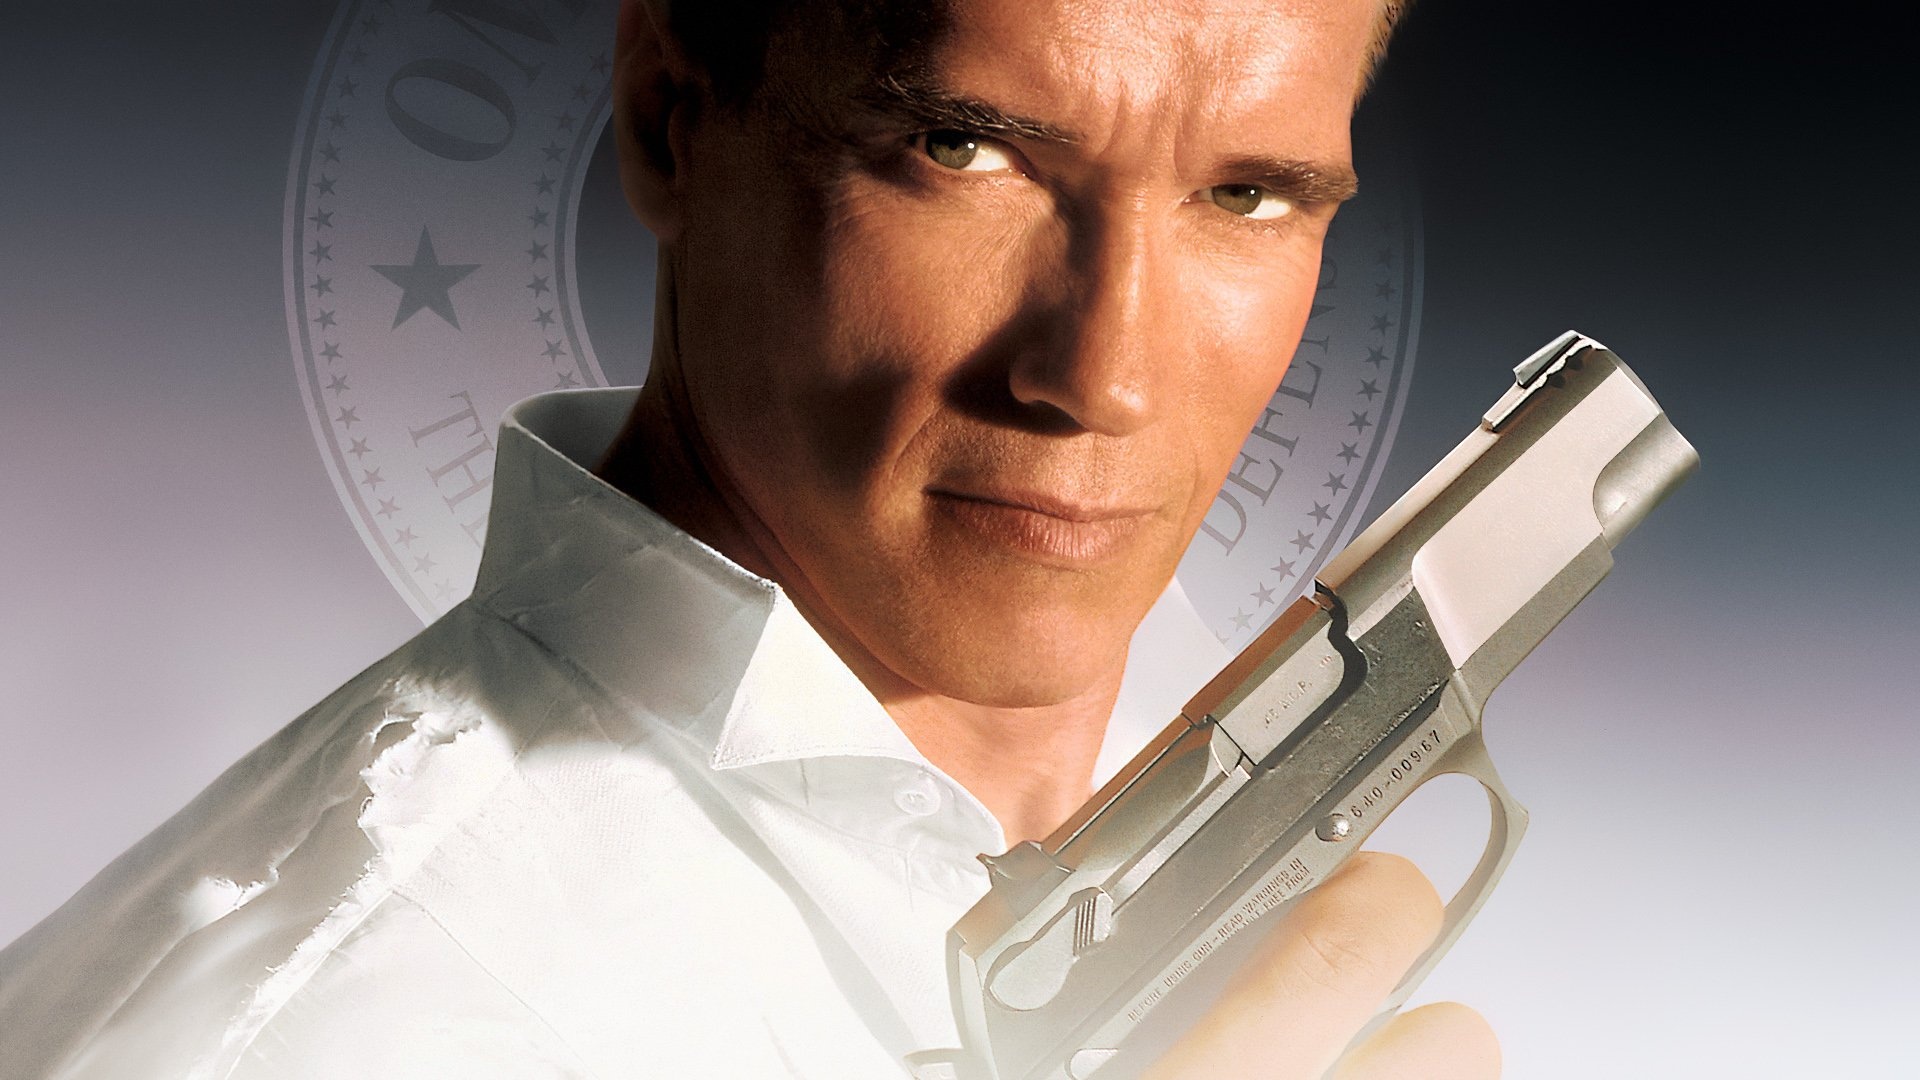 True Lies HD wallpapers, Explosive action, Thrilling spy adventure, Deception and intrigue, 1920x1080 Full HD Desktop